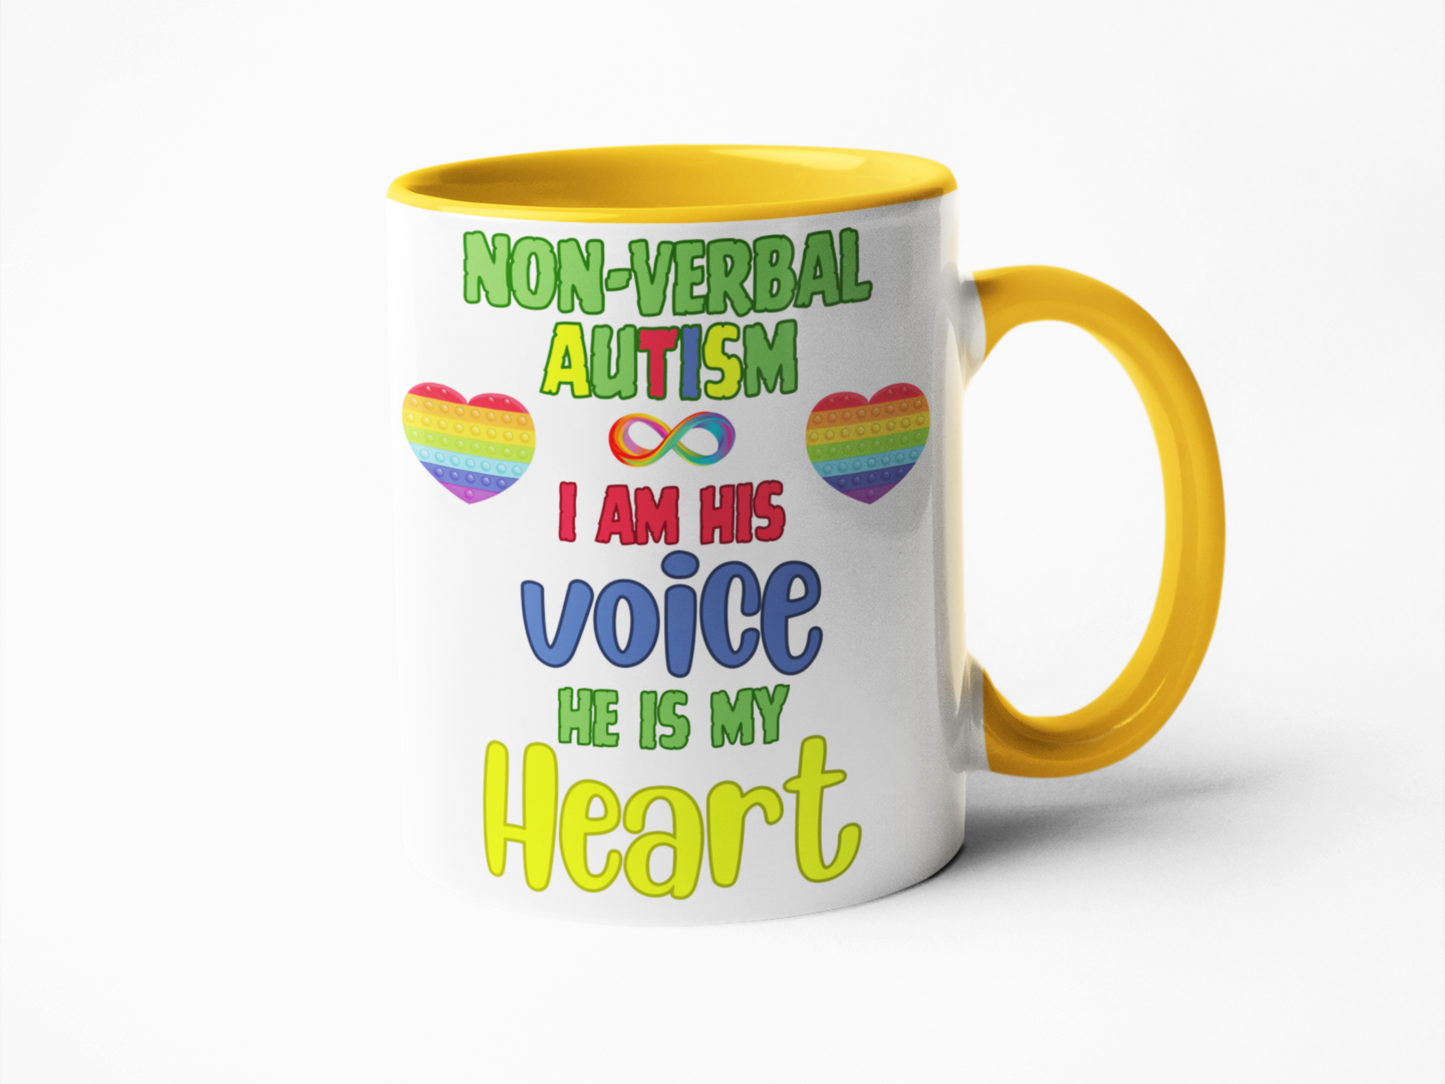 Non-verbal Autism I am his voice he is my heart coffee mug